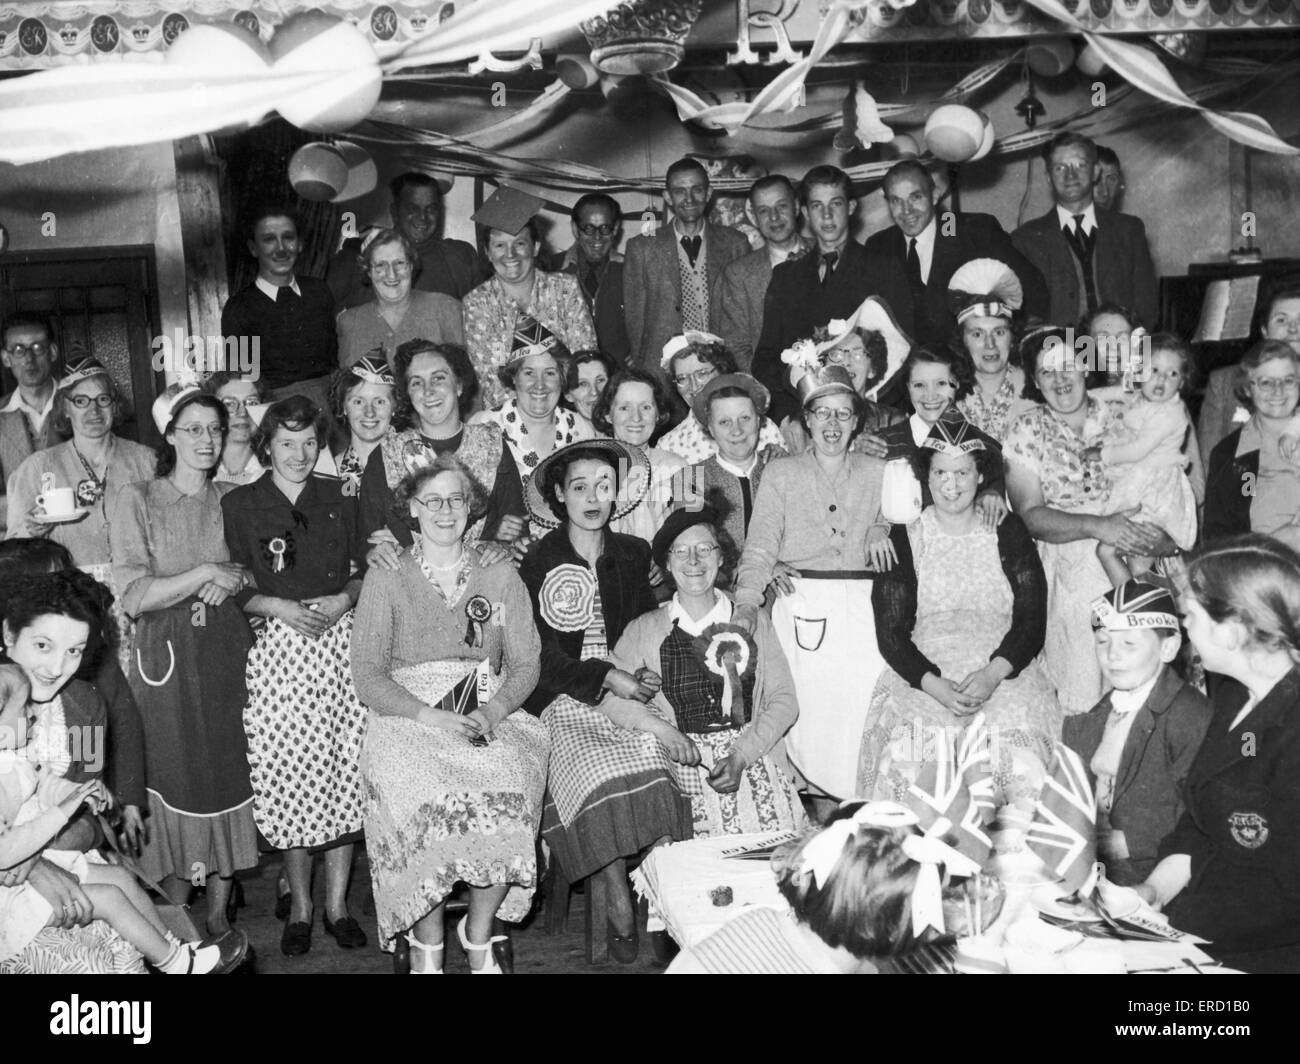 Families get together at the Stockingford Liberal Club to celebrate the Queen's coronation. Many of the party hats were give aways with Brooke Bond Tea. 2nd June 1953 Stock Photo